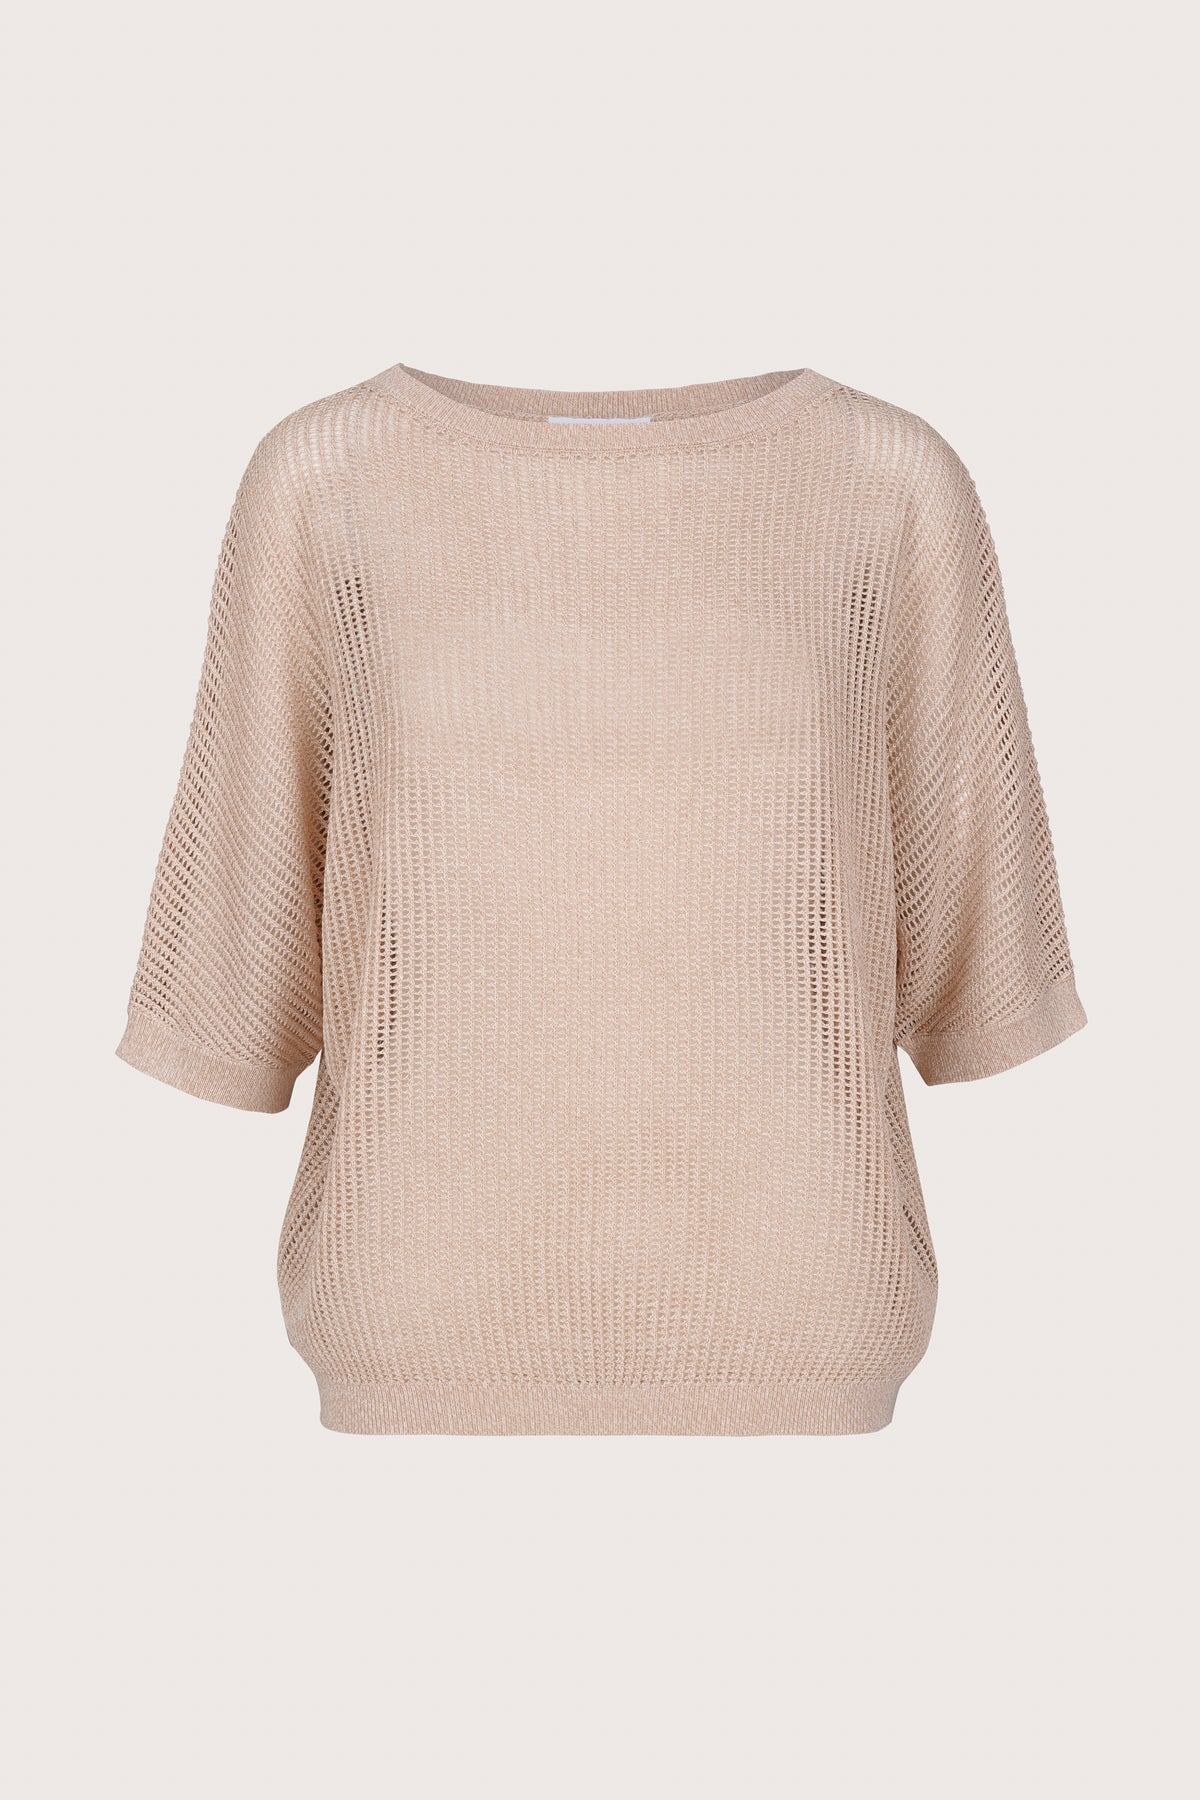 Short sleeve open weave jumper in beige with a round neck